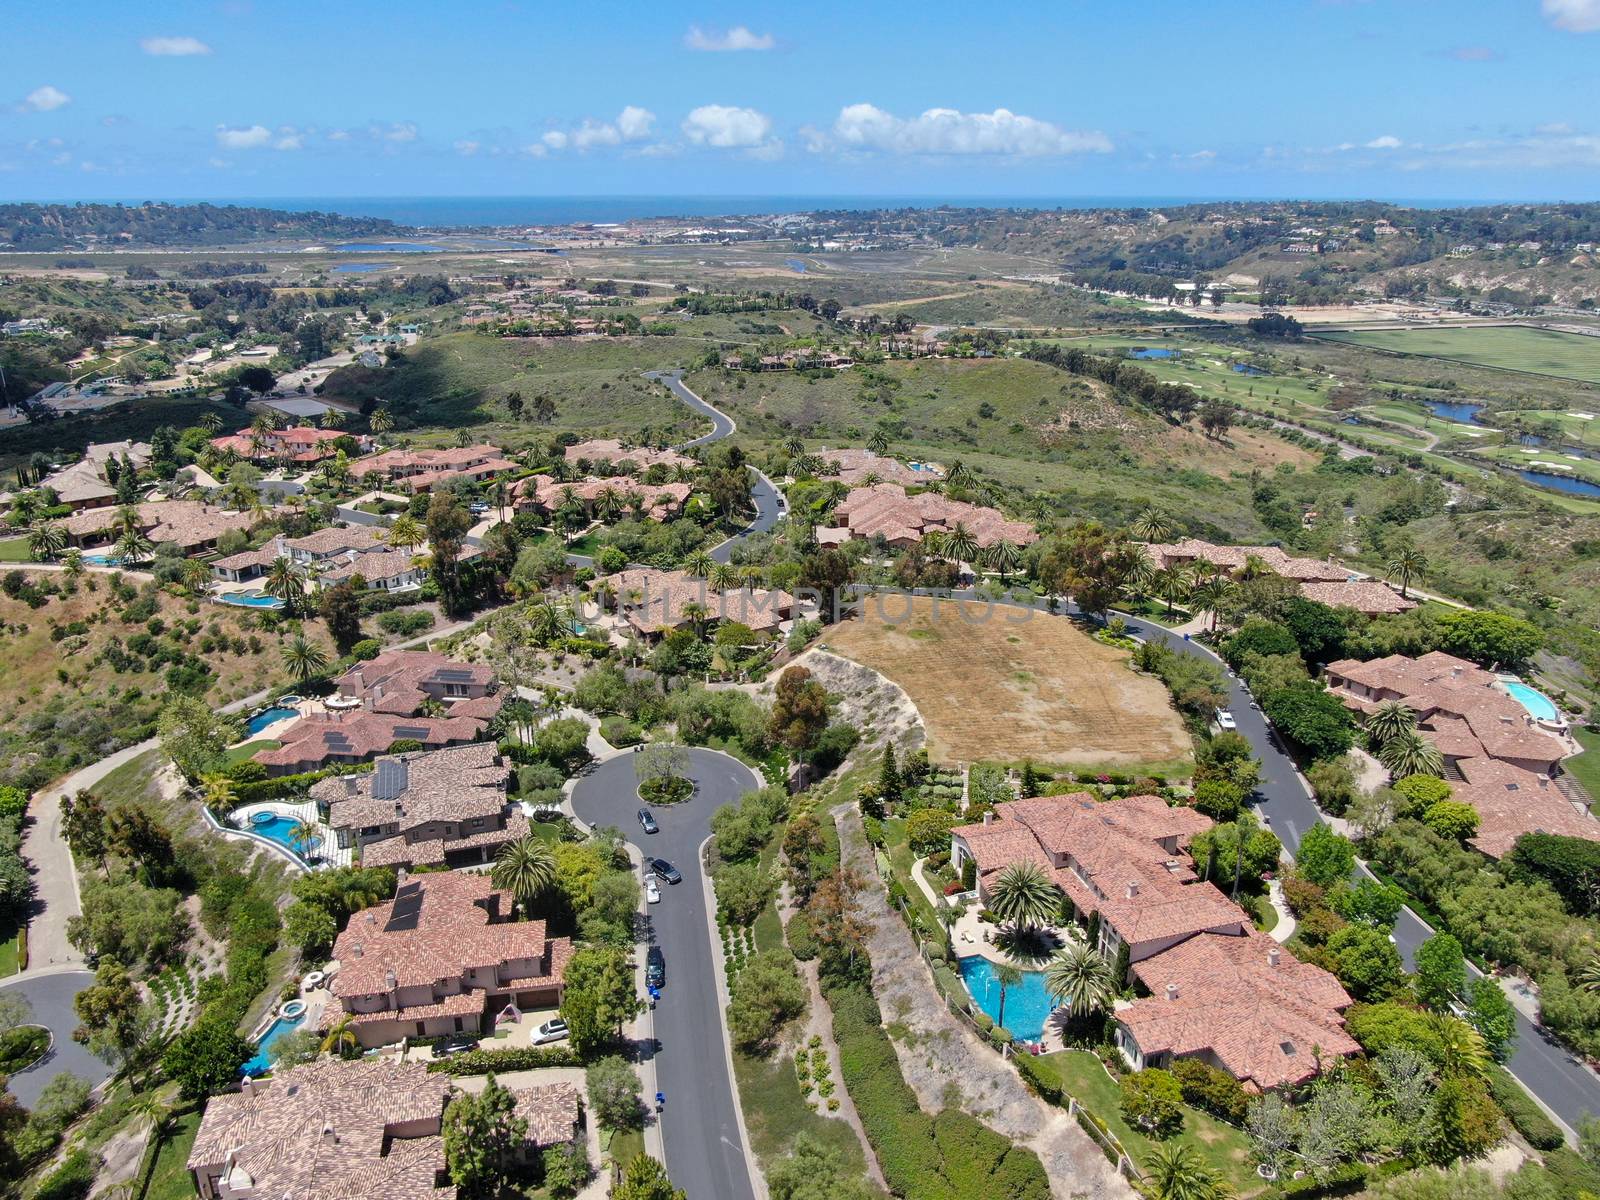 Aerial view of high class neighborhood with big residential mansions with swimming pool in the green valley, Pacific Highlands Ranch, San Diego, California, USA.